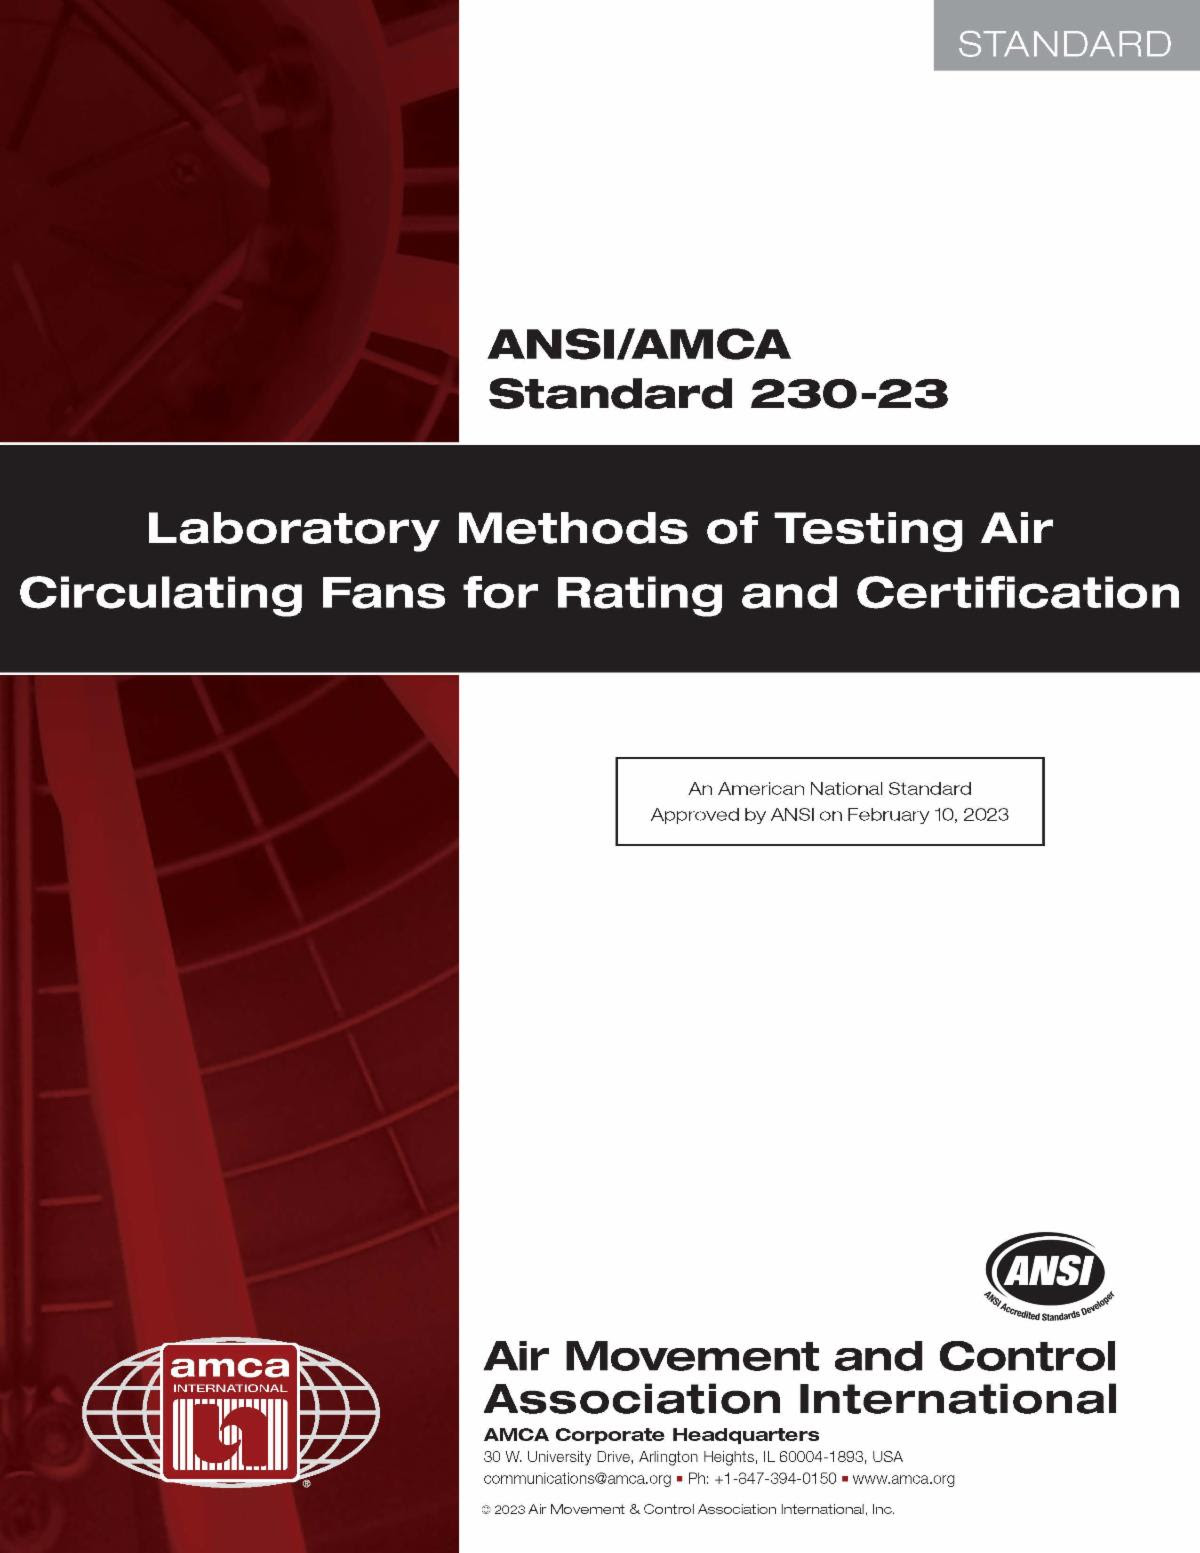 Laboratory Methods of Testing Air-Circulating Fans for Rating and Certification.